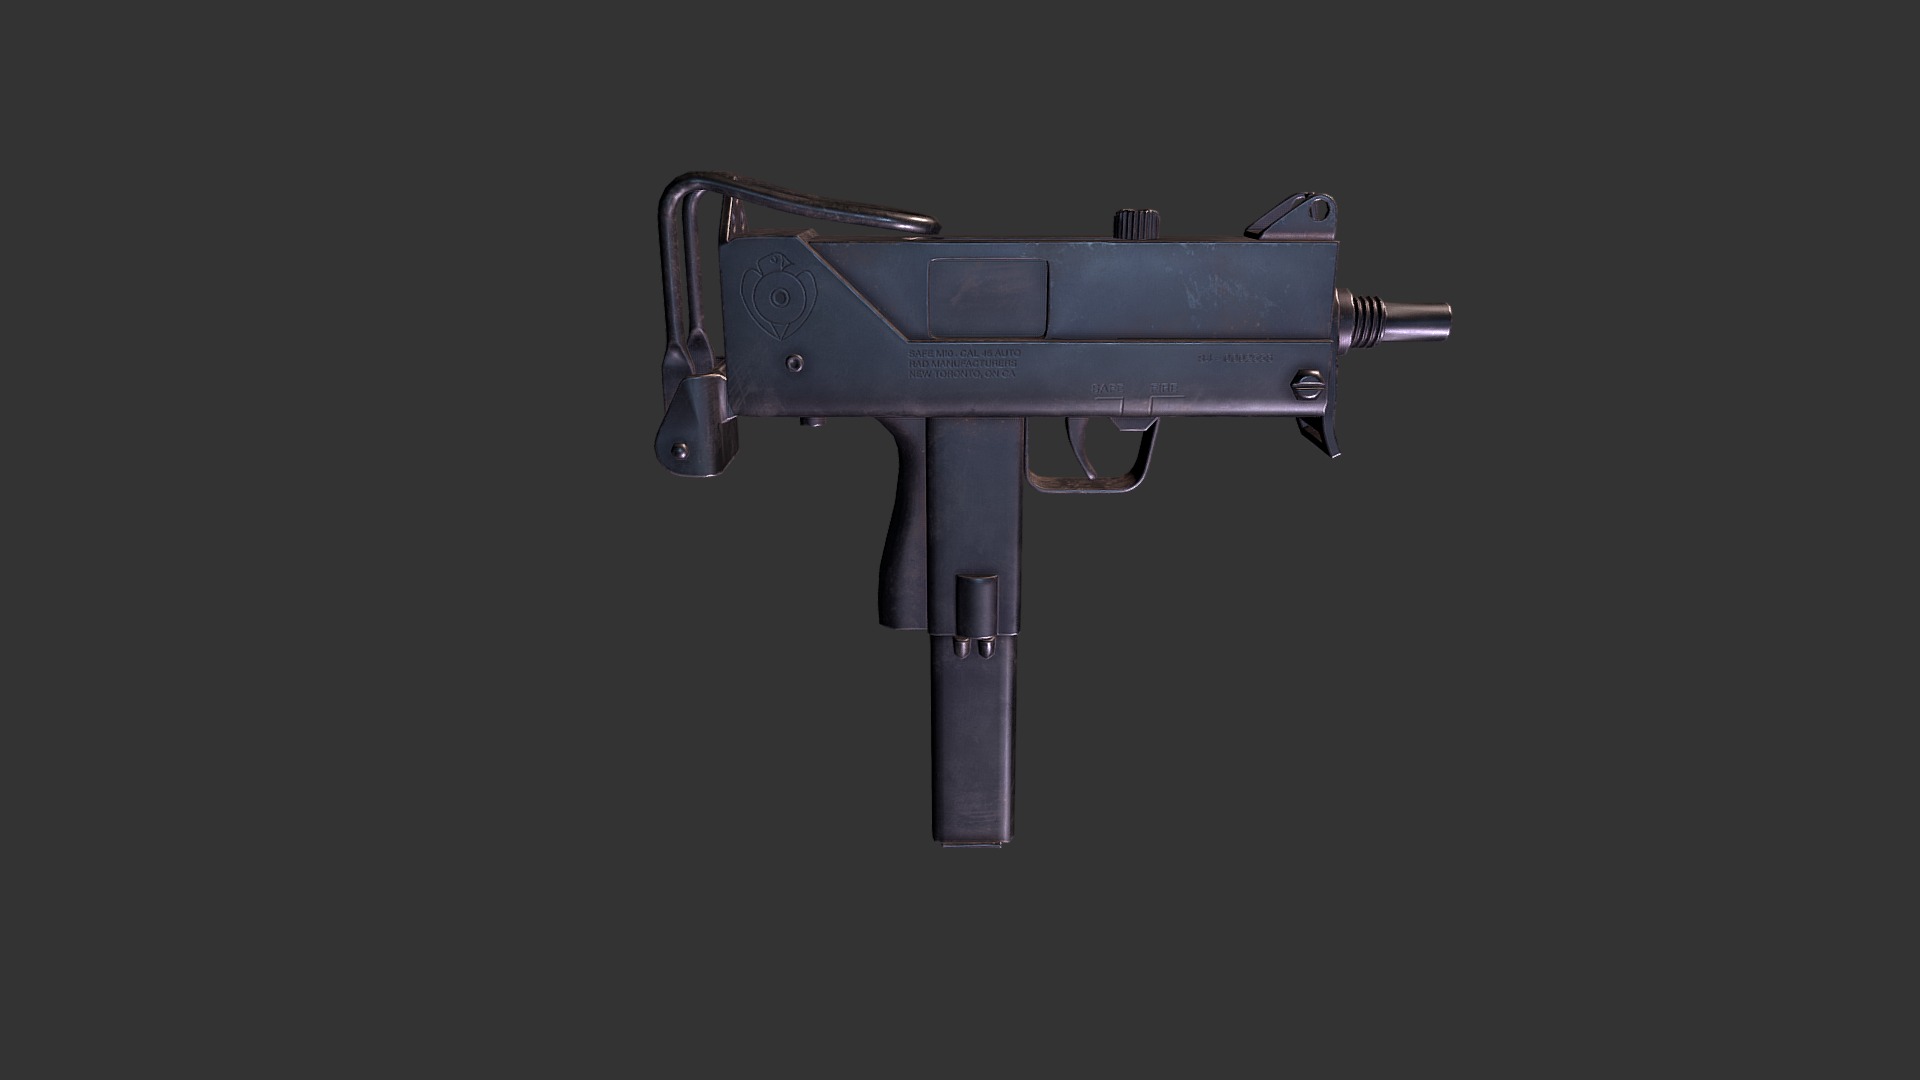 This is a game ready model.
Type: MAC-10 
Features: Fully modeled internals, with bolt mechanism, Trigger, and extendable stock. 
The textures are 4k - so it can be used as a first person view model. this is a great option for someone who wants to build an arsenal for an FPS game, whether prototyping or final product 3d model